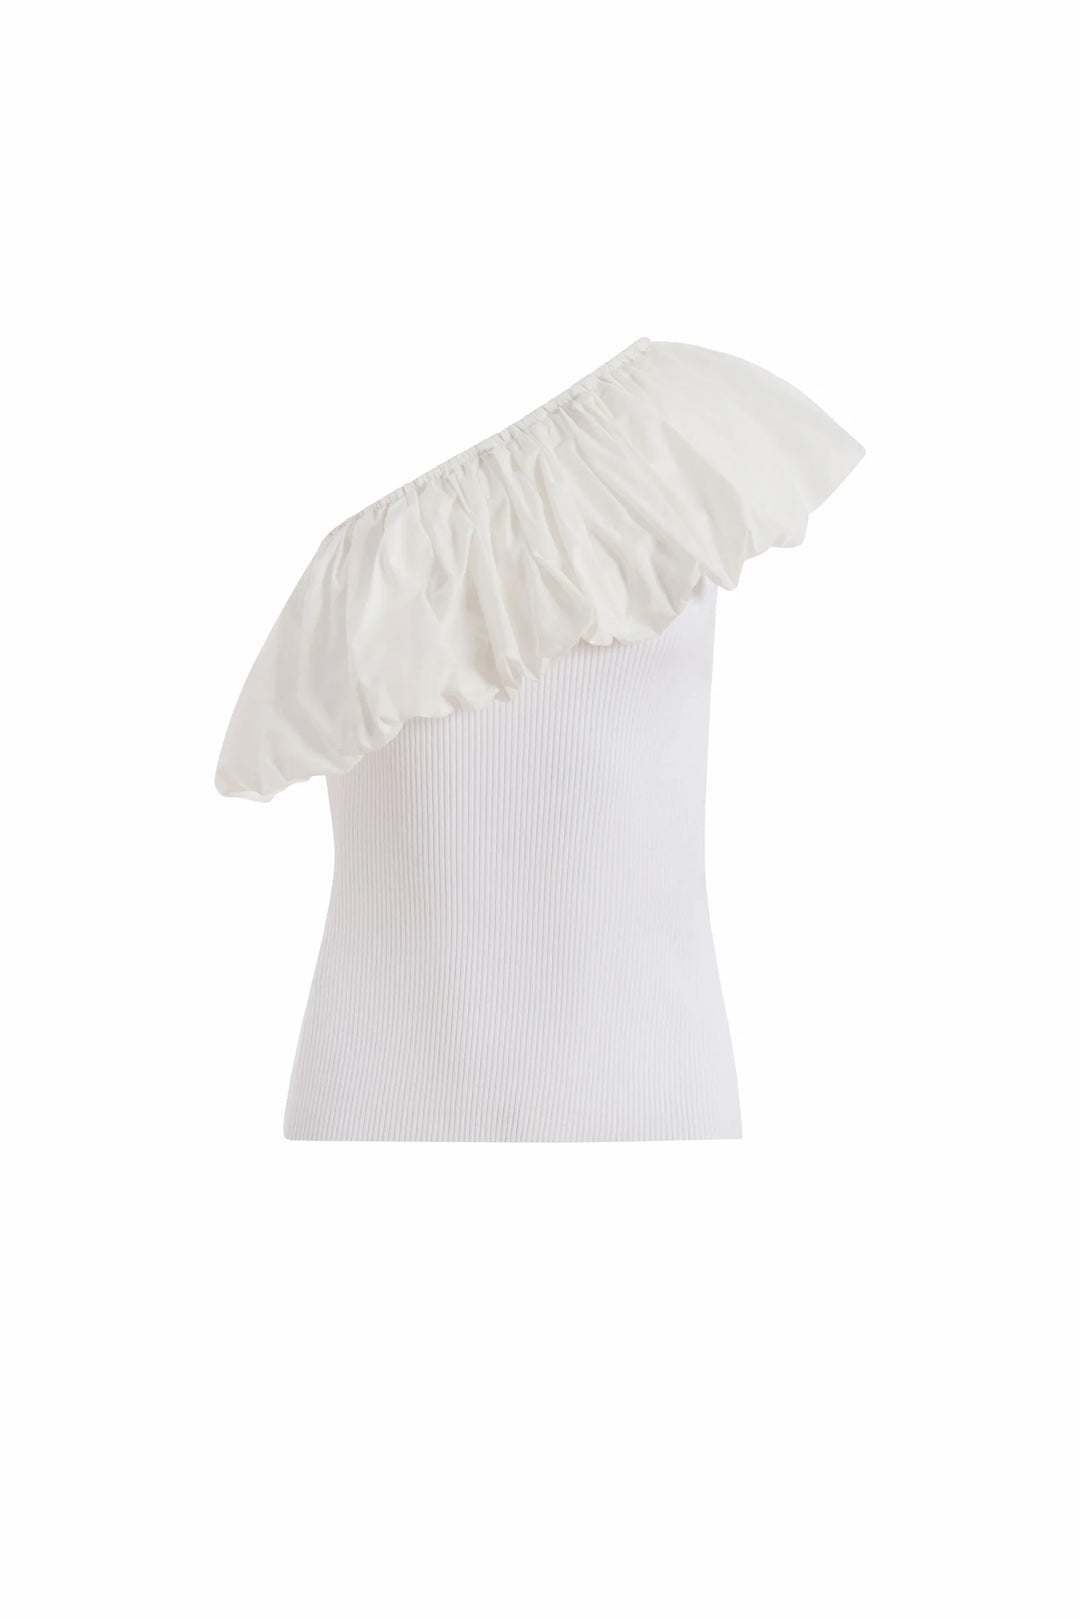 Marie Oliver Lucy Top | Oyster